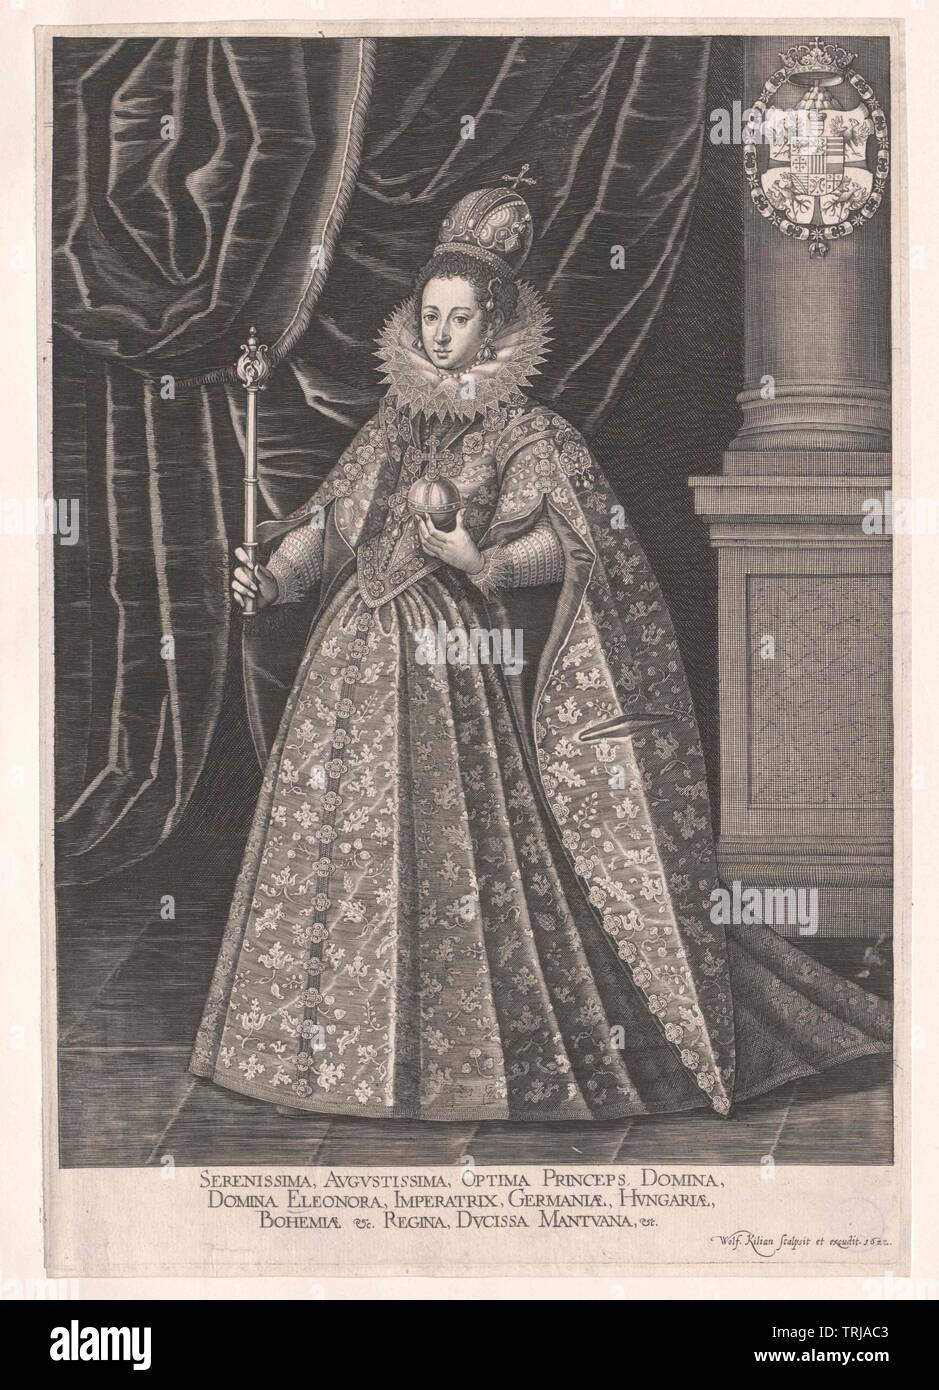 1568, Eleanor princesse de Mantoue,-Additional-Rights Clearance-Info-Not-Available Banque D'Images